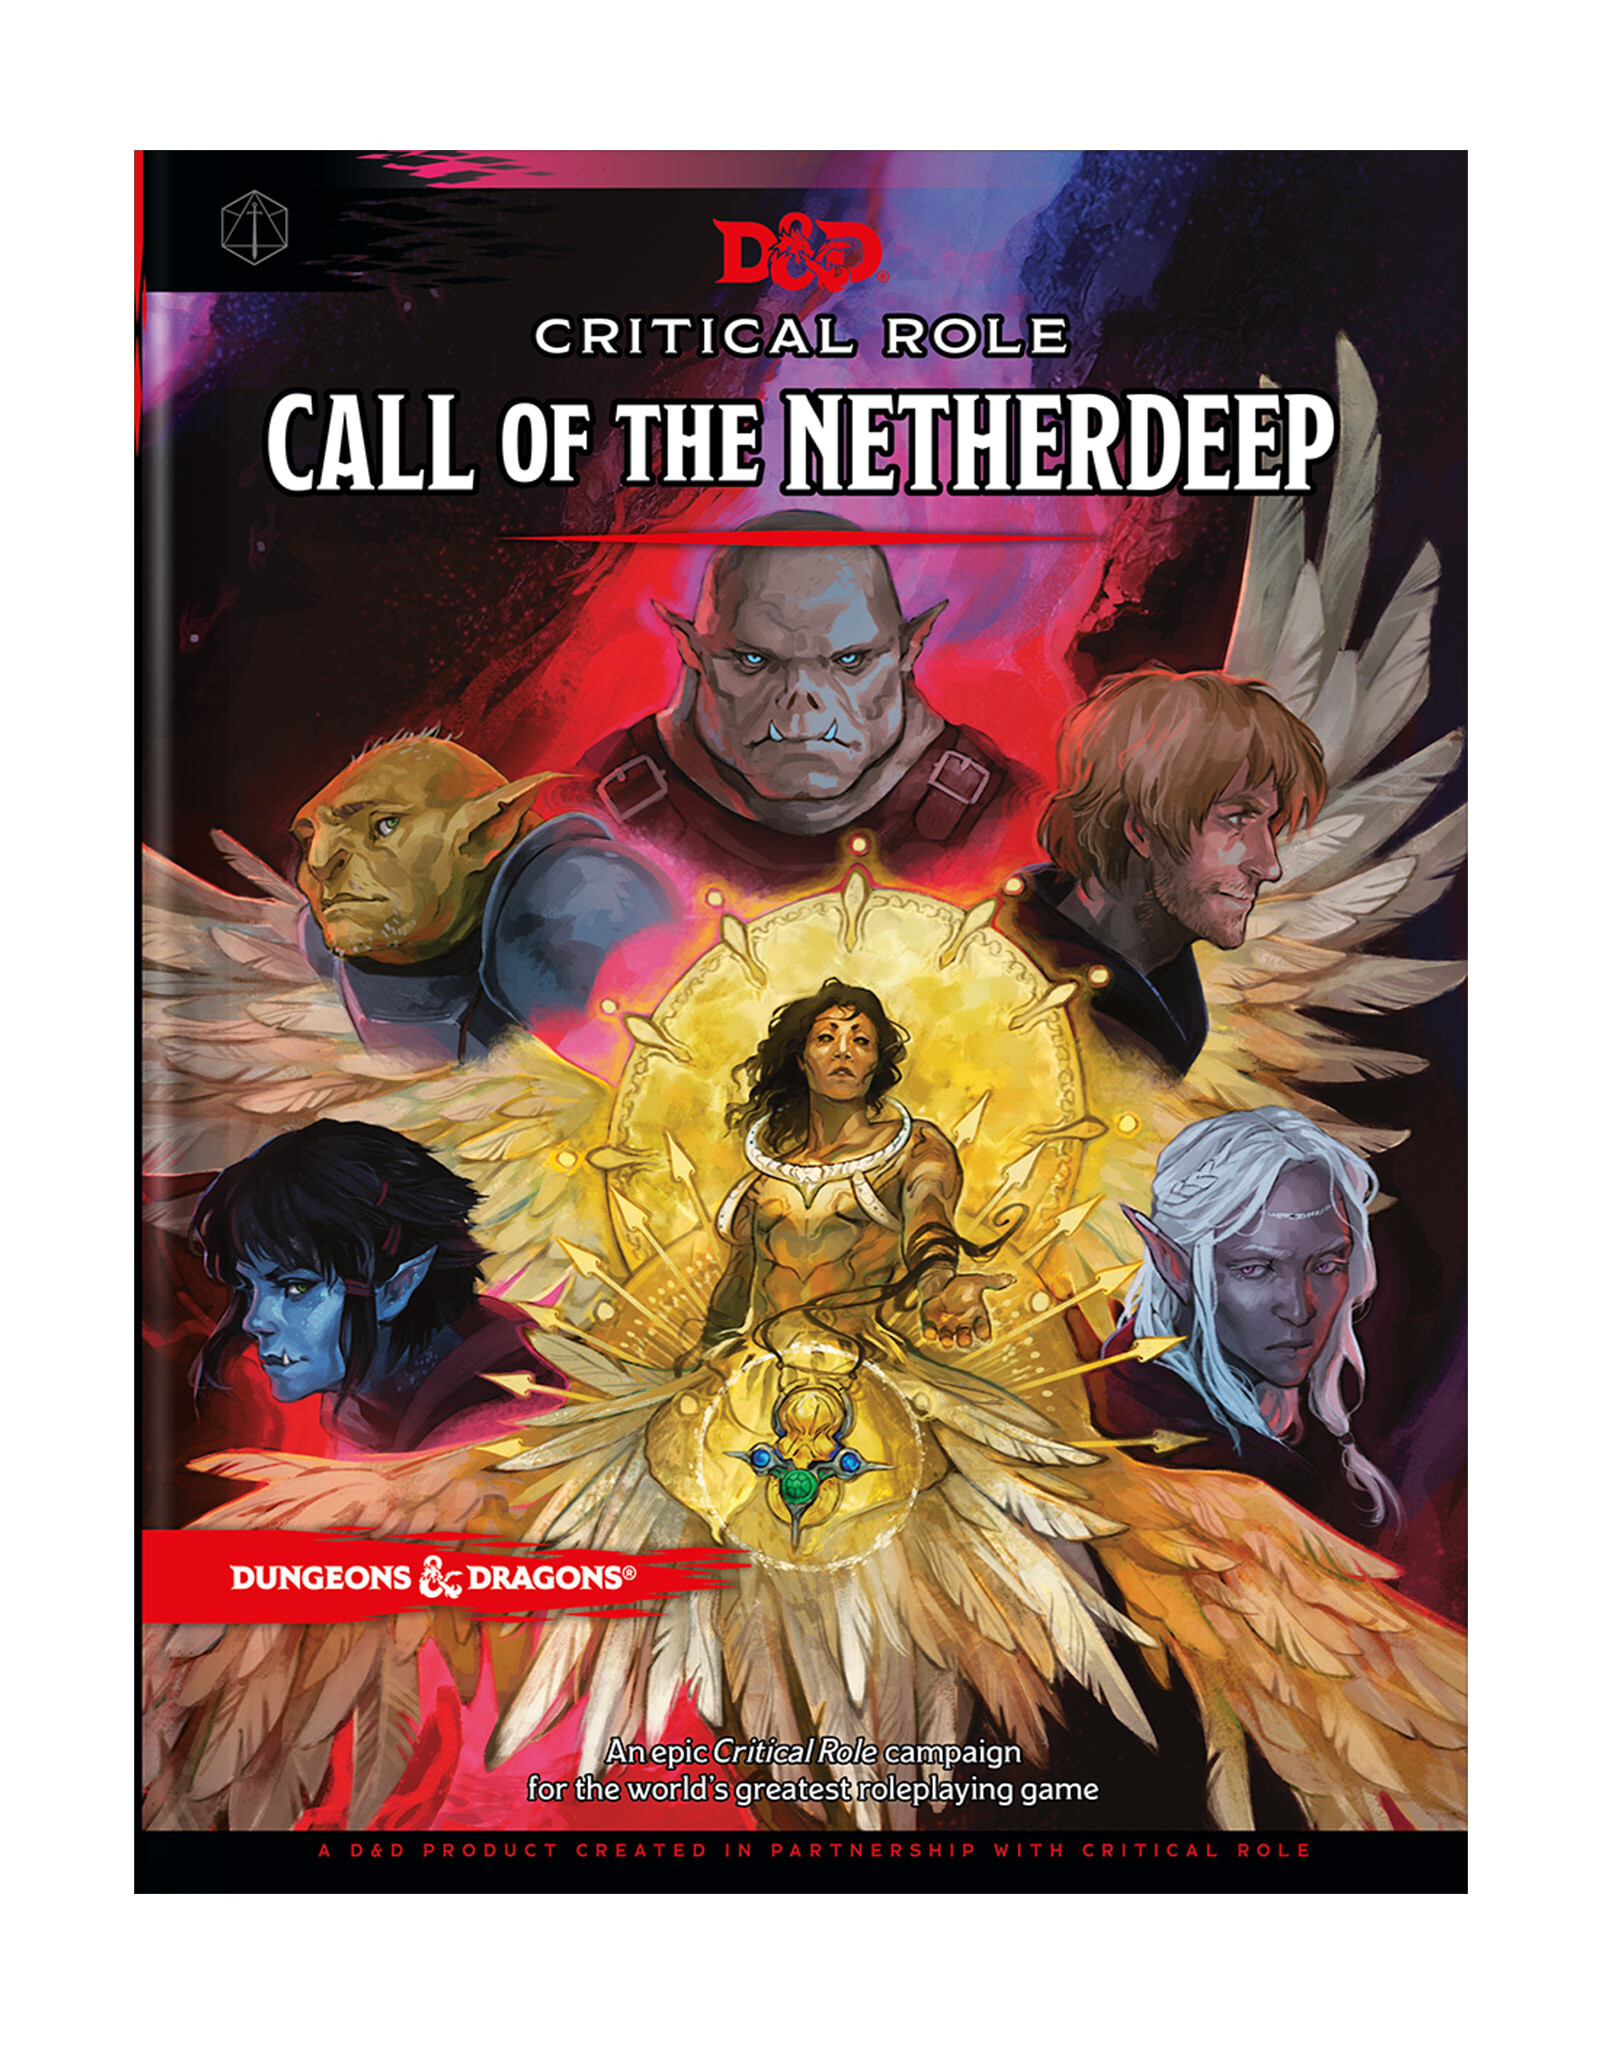 Wizards of The Coast Dungeons & Dragons RPG: Critical Role - Call of the Netherdeep Hard Cover